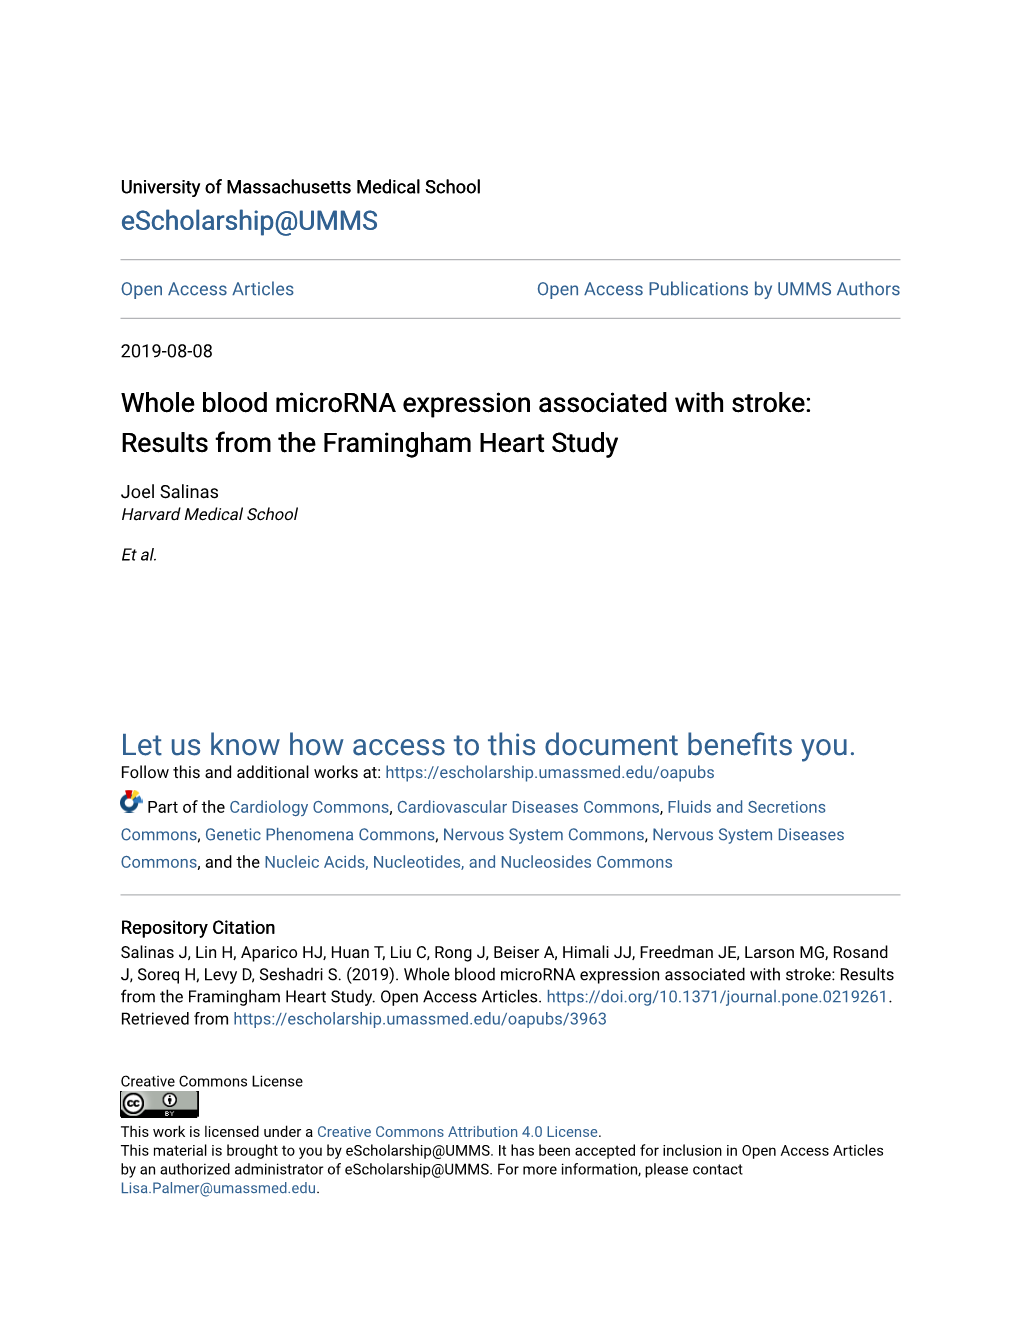 Whole Blood Microrna Expression Associated with Stroke: Results from the Framingham Heart Study